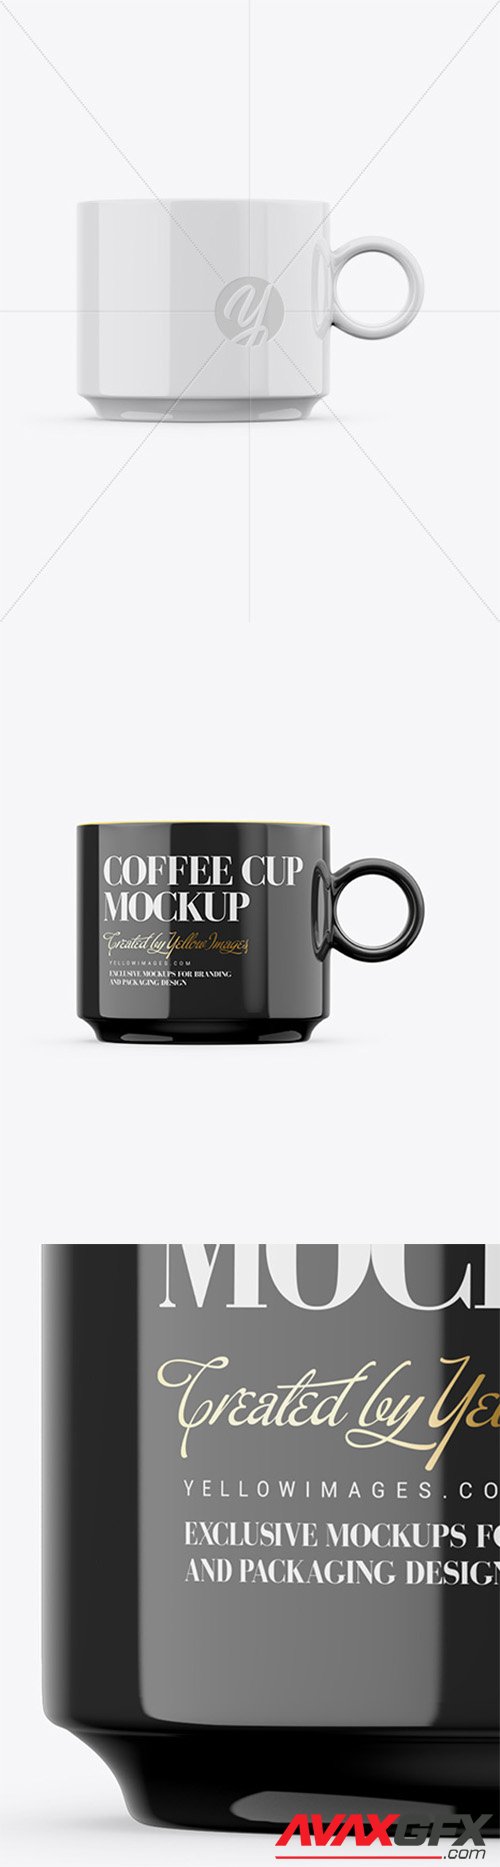 Download Glossy Coffee Cup Mockup Front View 26660 Avaxgfx All Downloads That You Need In One Place Graphic From Nitroflare Rapidgator Yellowimages Mockups